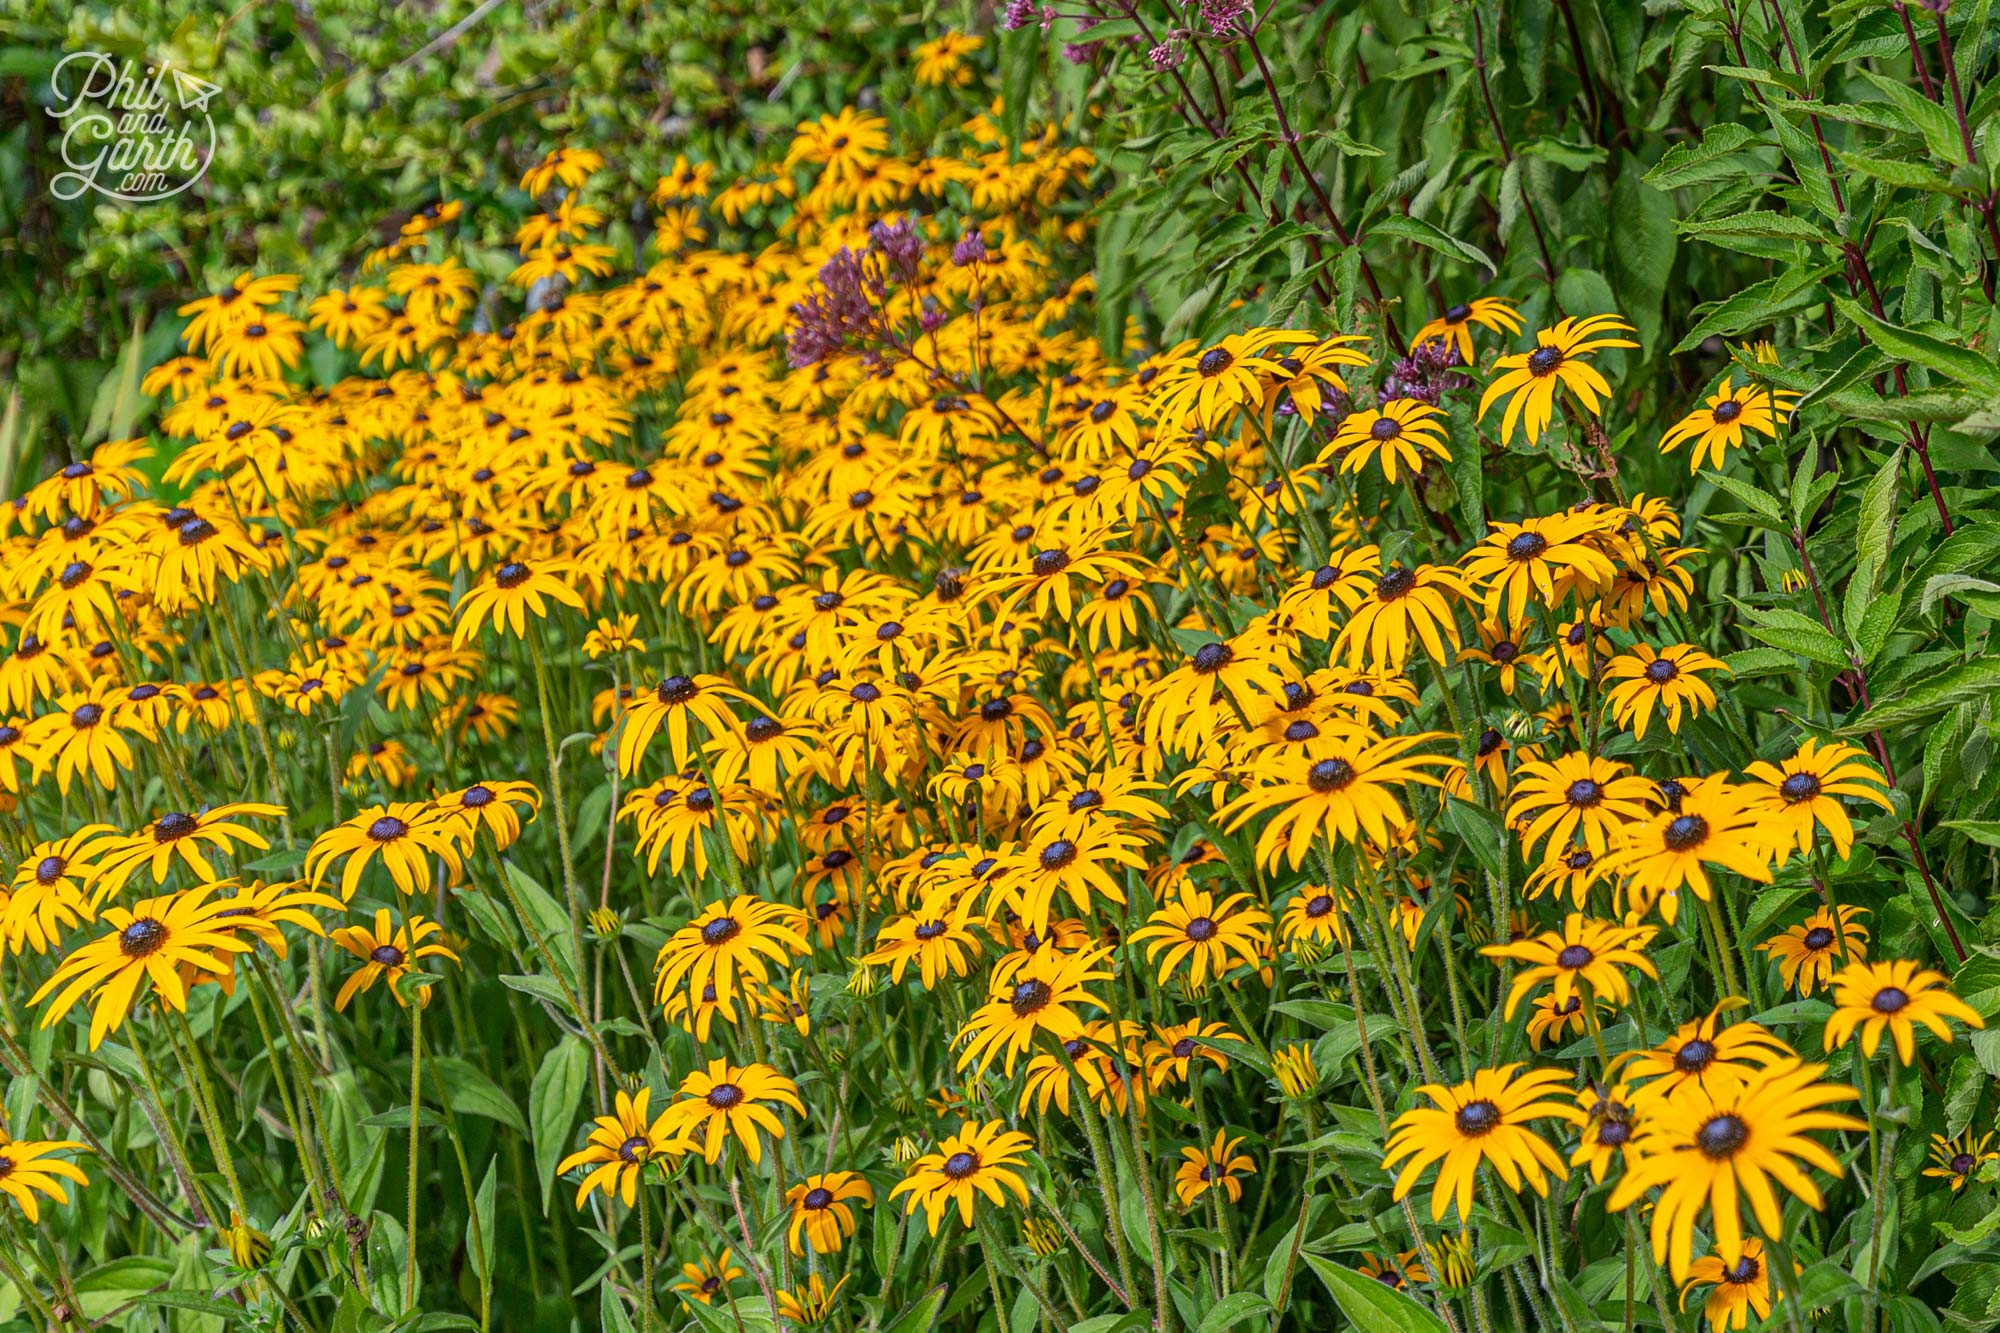 We love these Black-eyed Susan Rudbeckia plants and have them in our garden for late summer colour